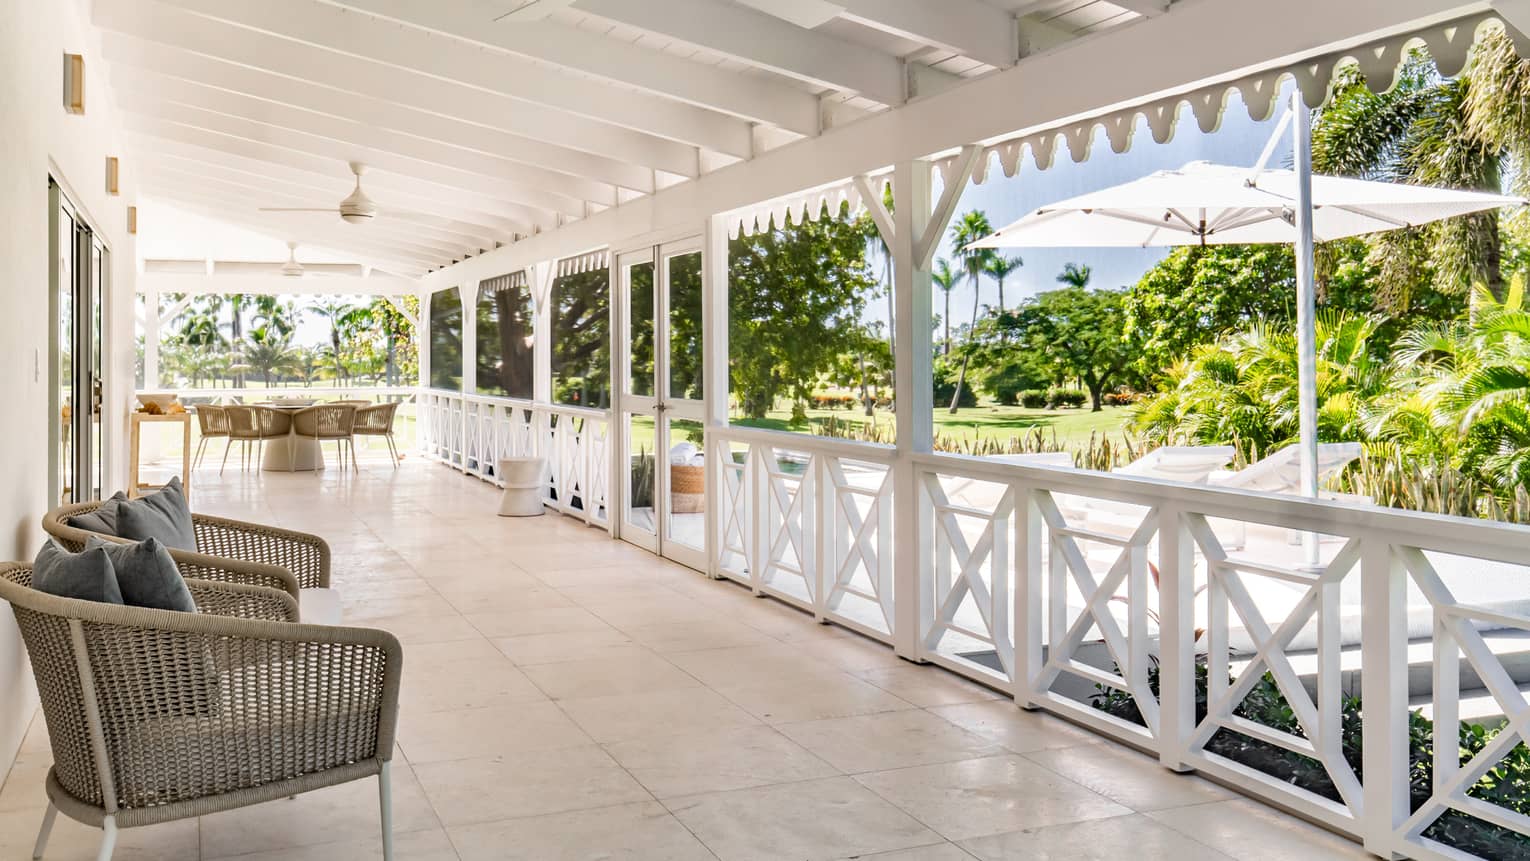 Covered porch of home in Nevis, with arm chairs and a tropical view